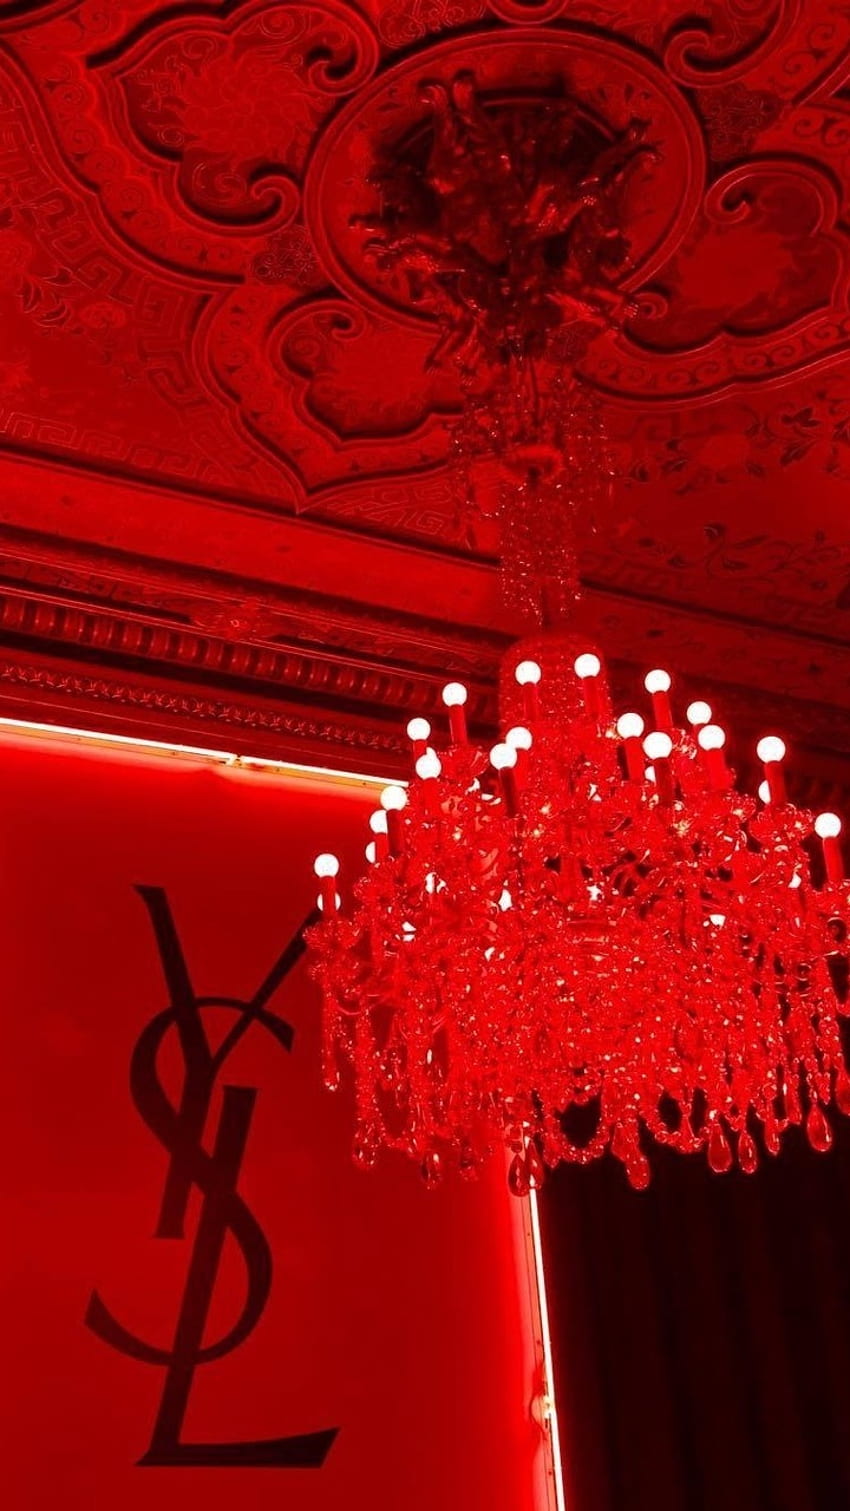 A red chandelier hanging from a ceiling. - Light red